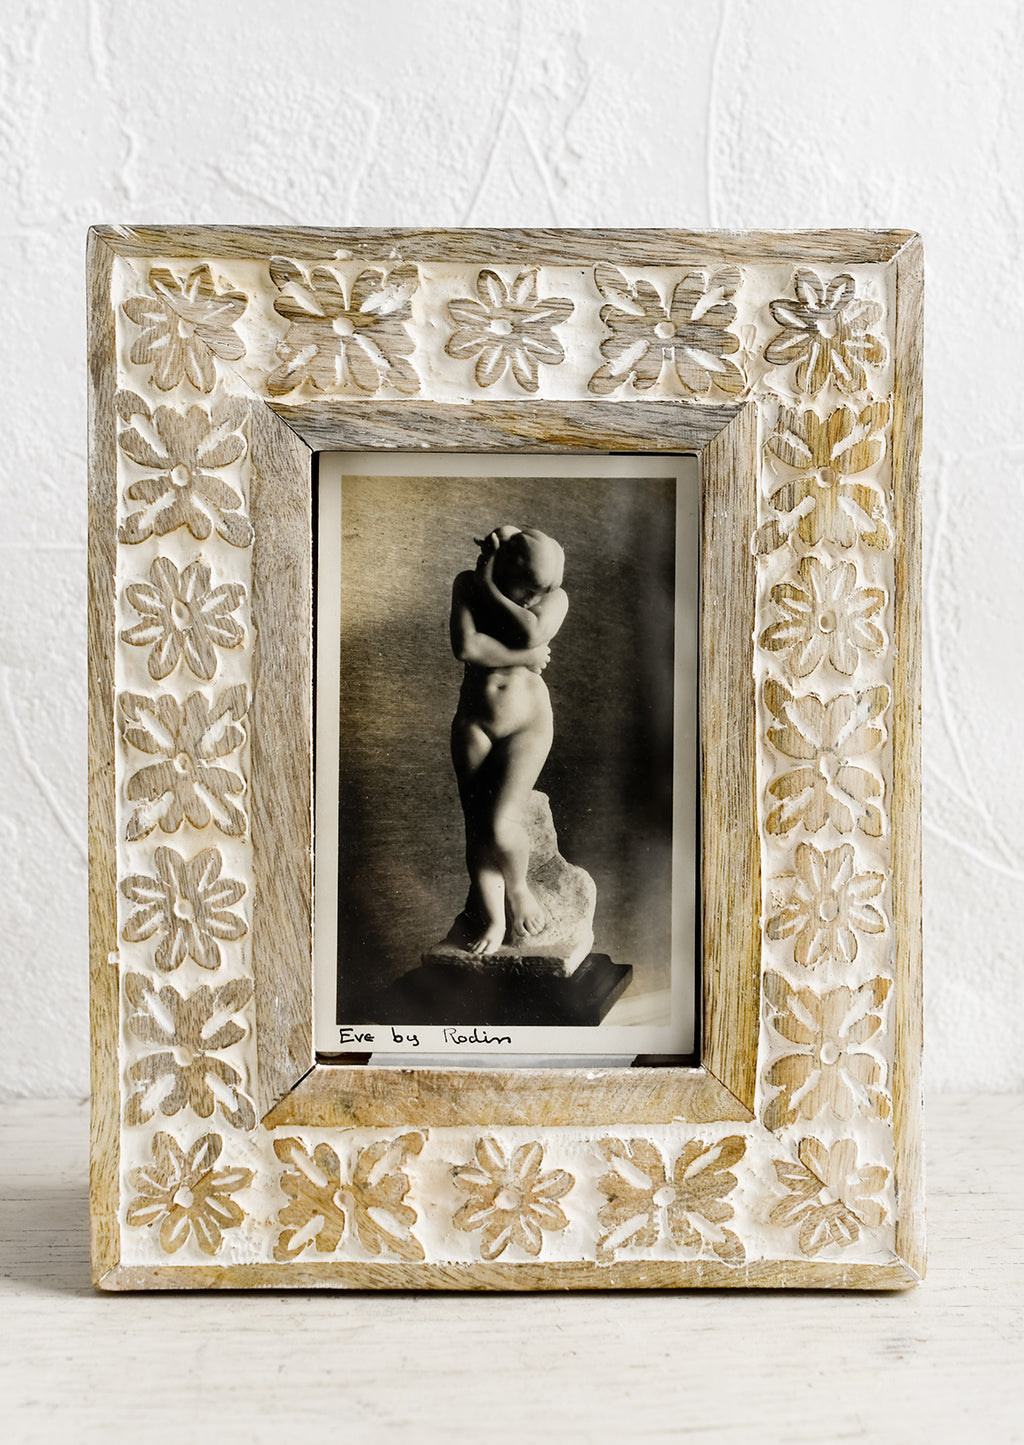 1: A wooden picture frame with carved whitewash floral design.